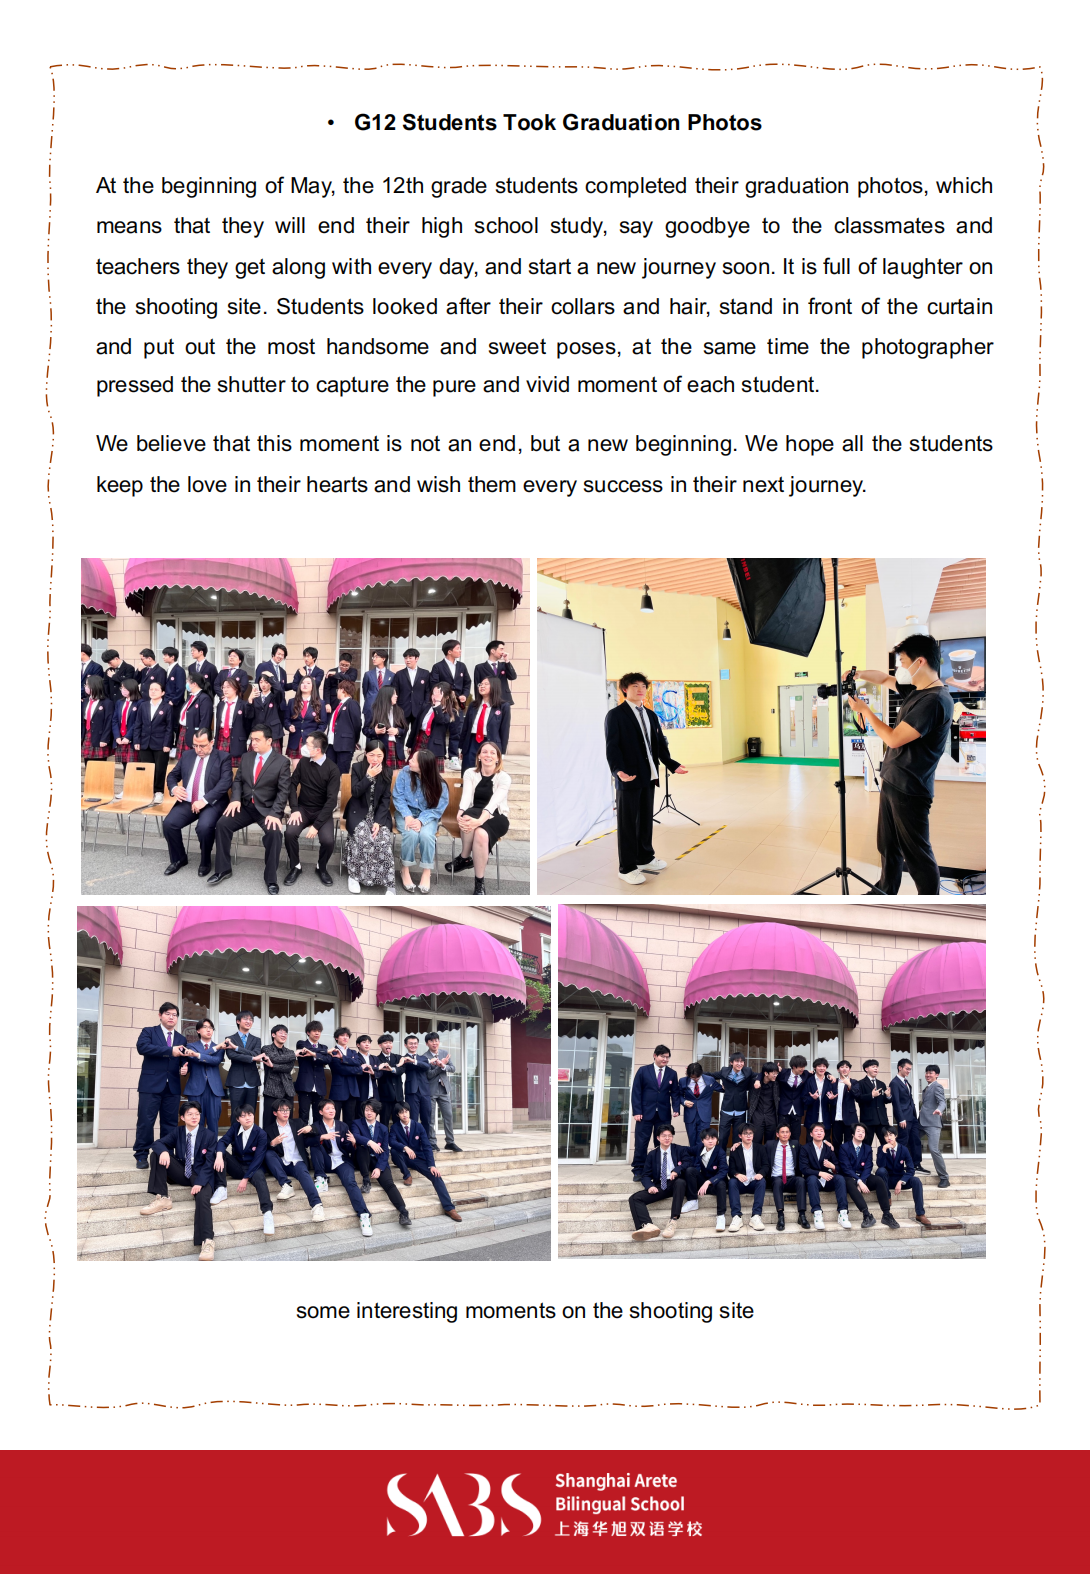 HS 7th Issue Newsletter pptx（English)_02.png